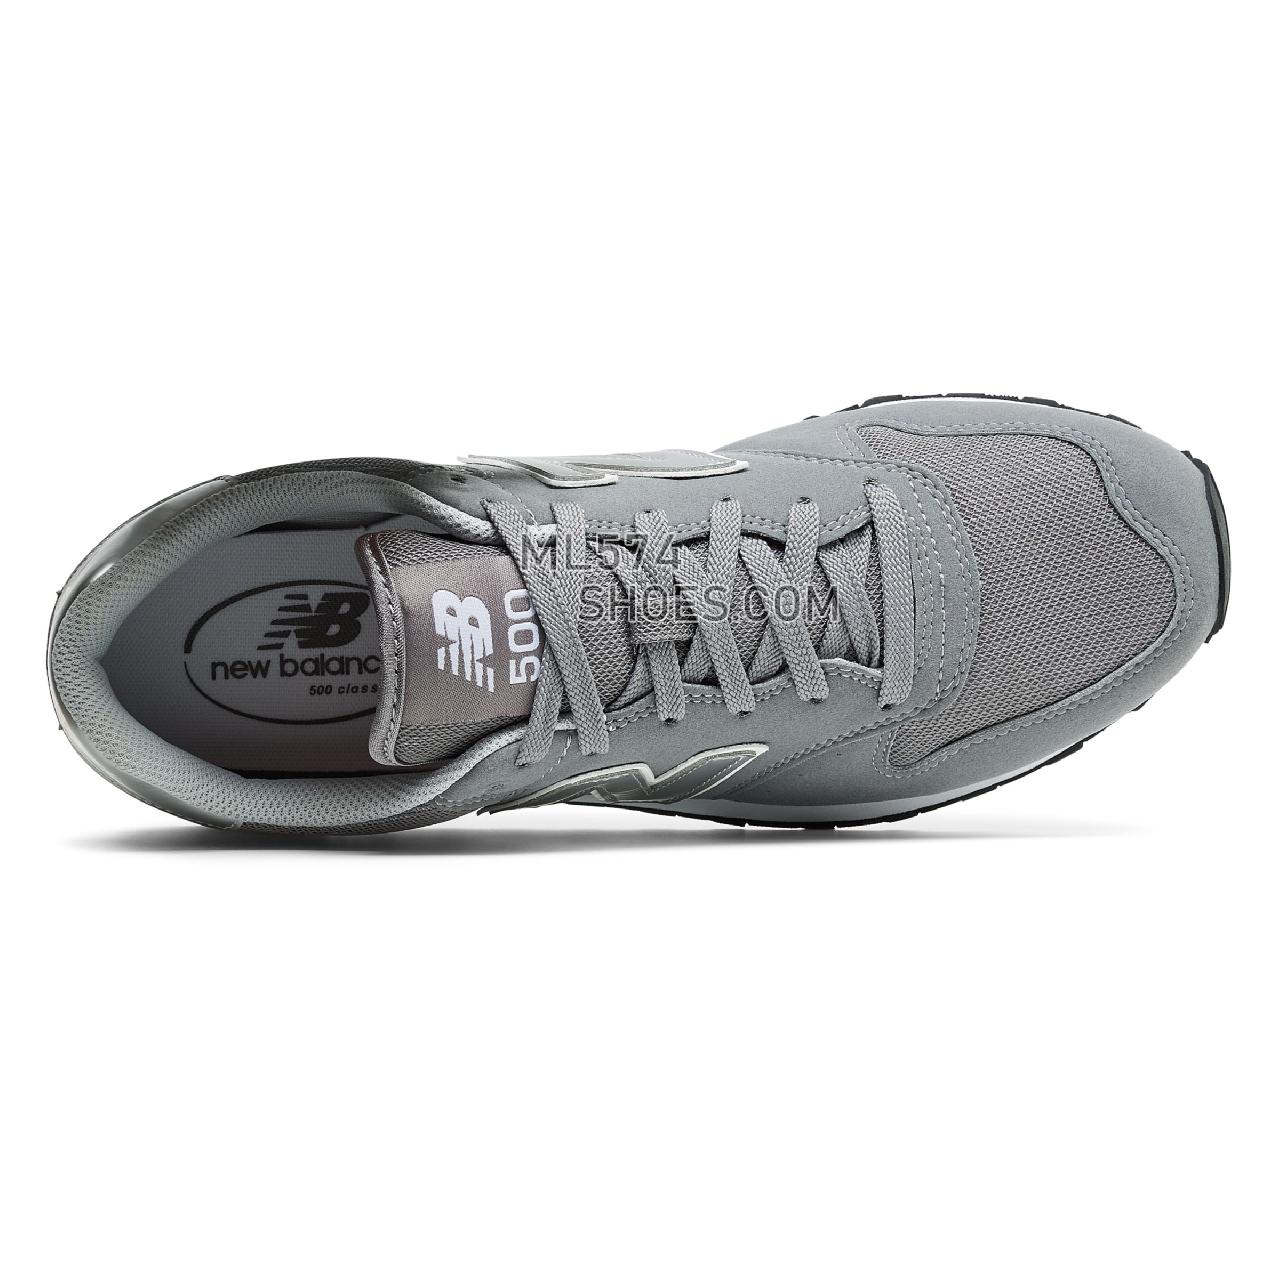 New Balance 500 Classic - Men's Classic Sneakers - Grey with White - GM500GRY